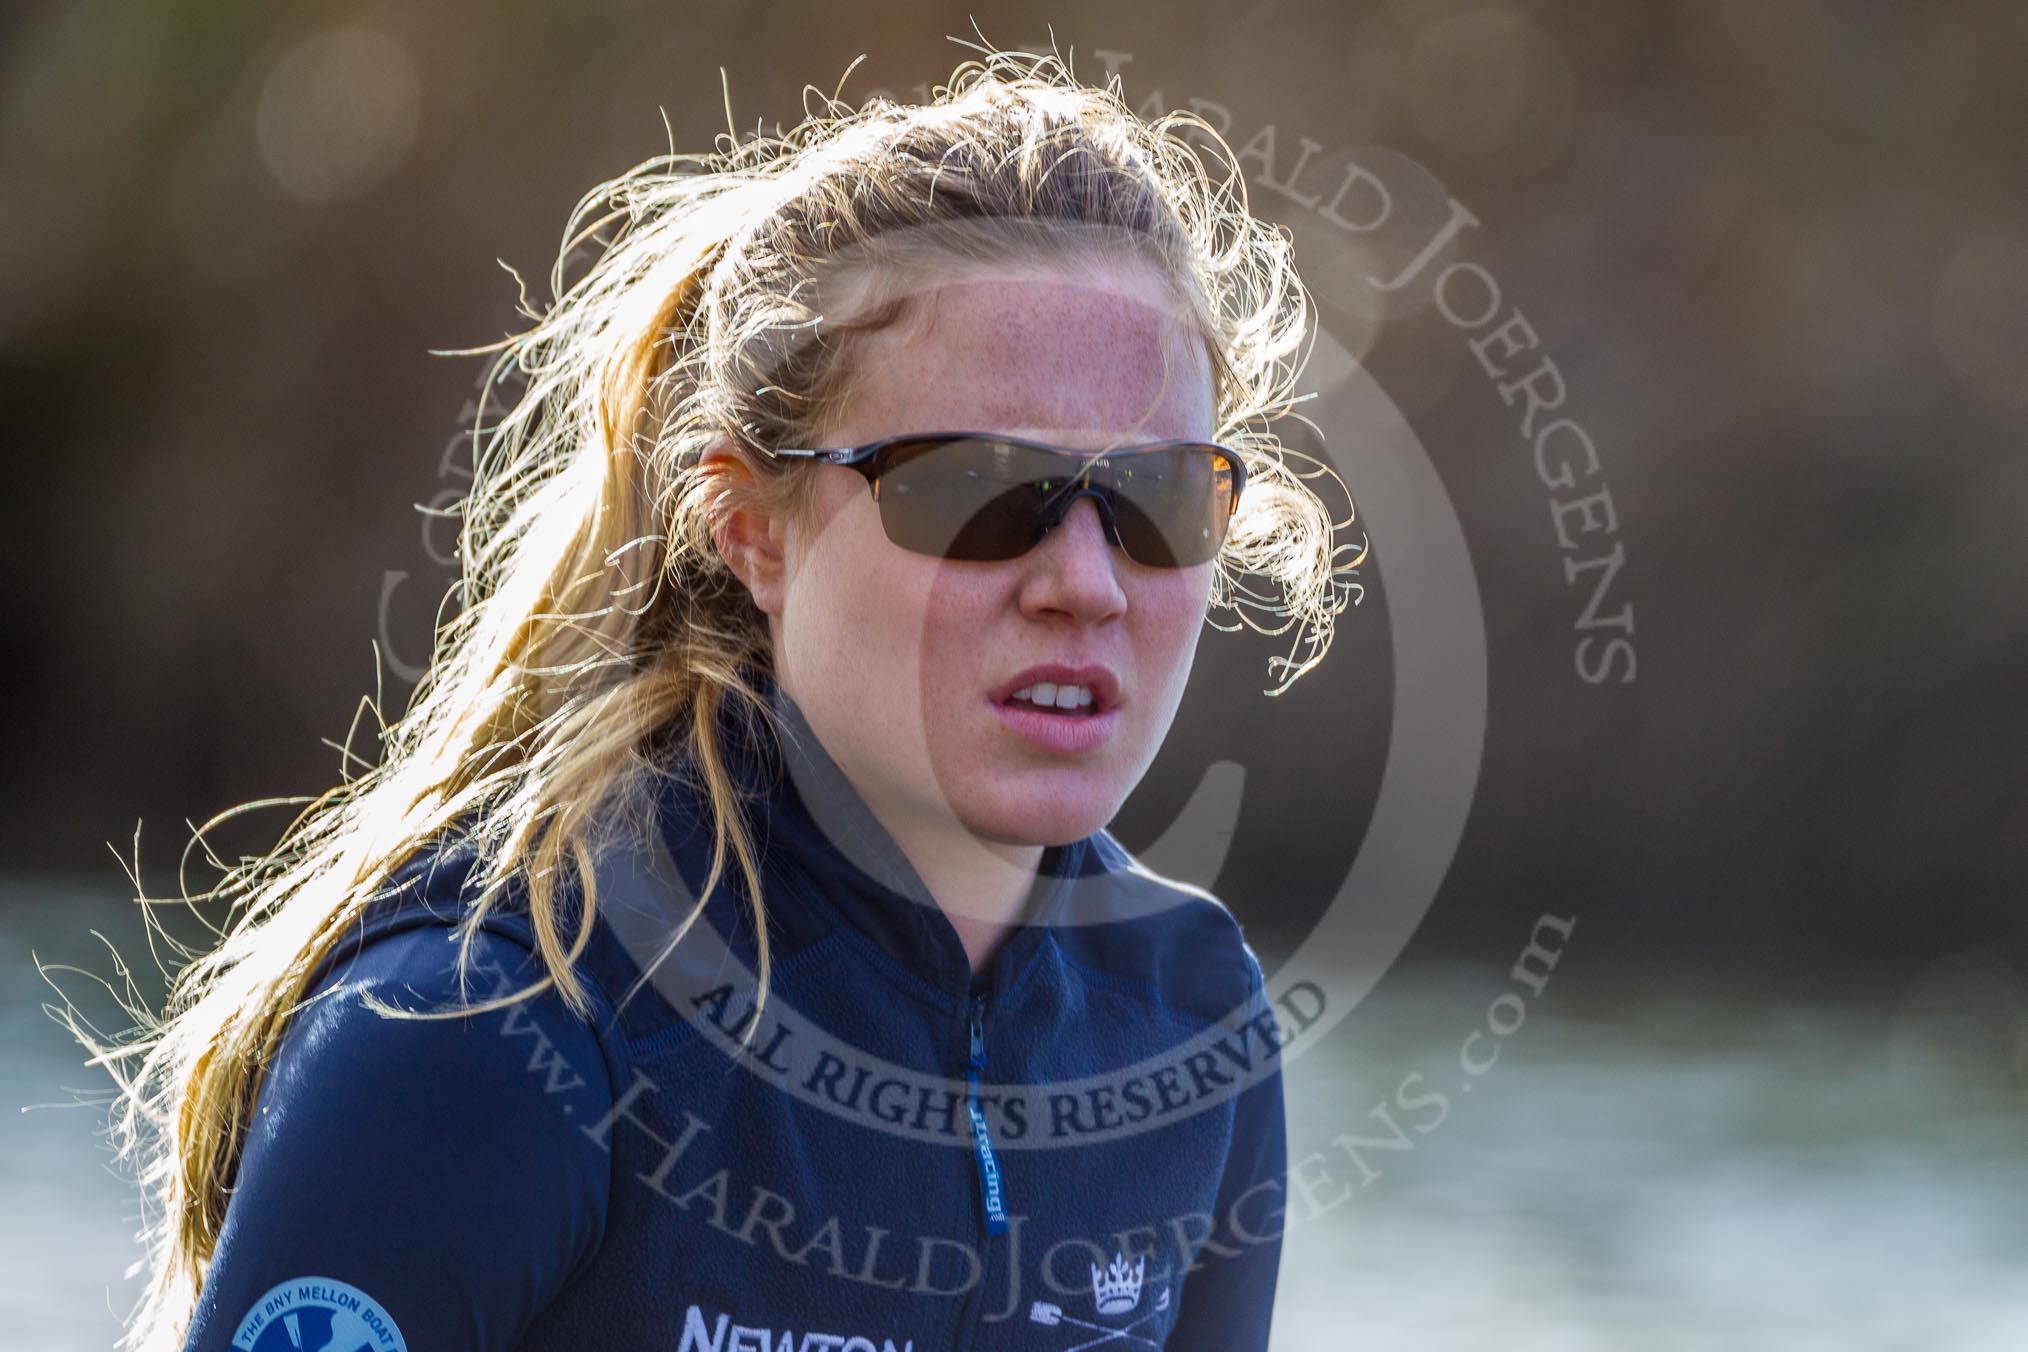 The Boat Race season 2015: OUWBC training Wallingford.

Wallingford,

United Kingdom,
on 04 March 2015 at 15:38, image #30